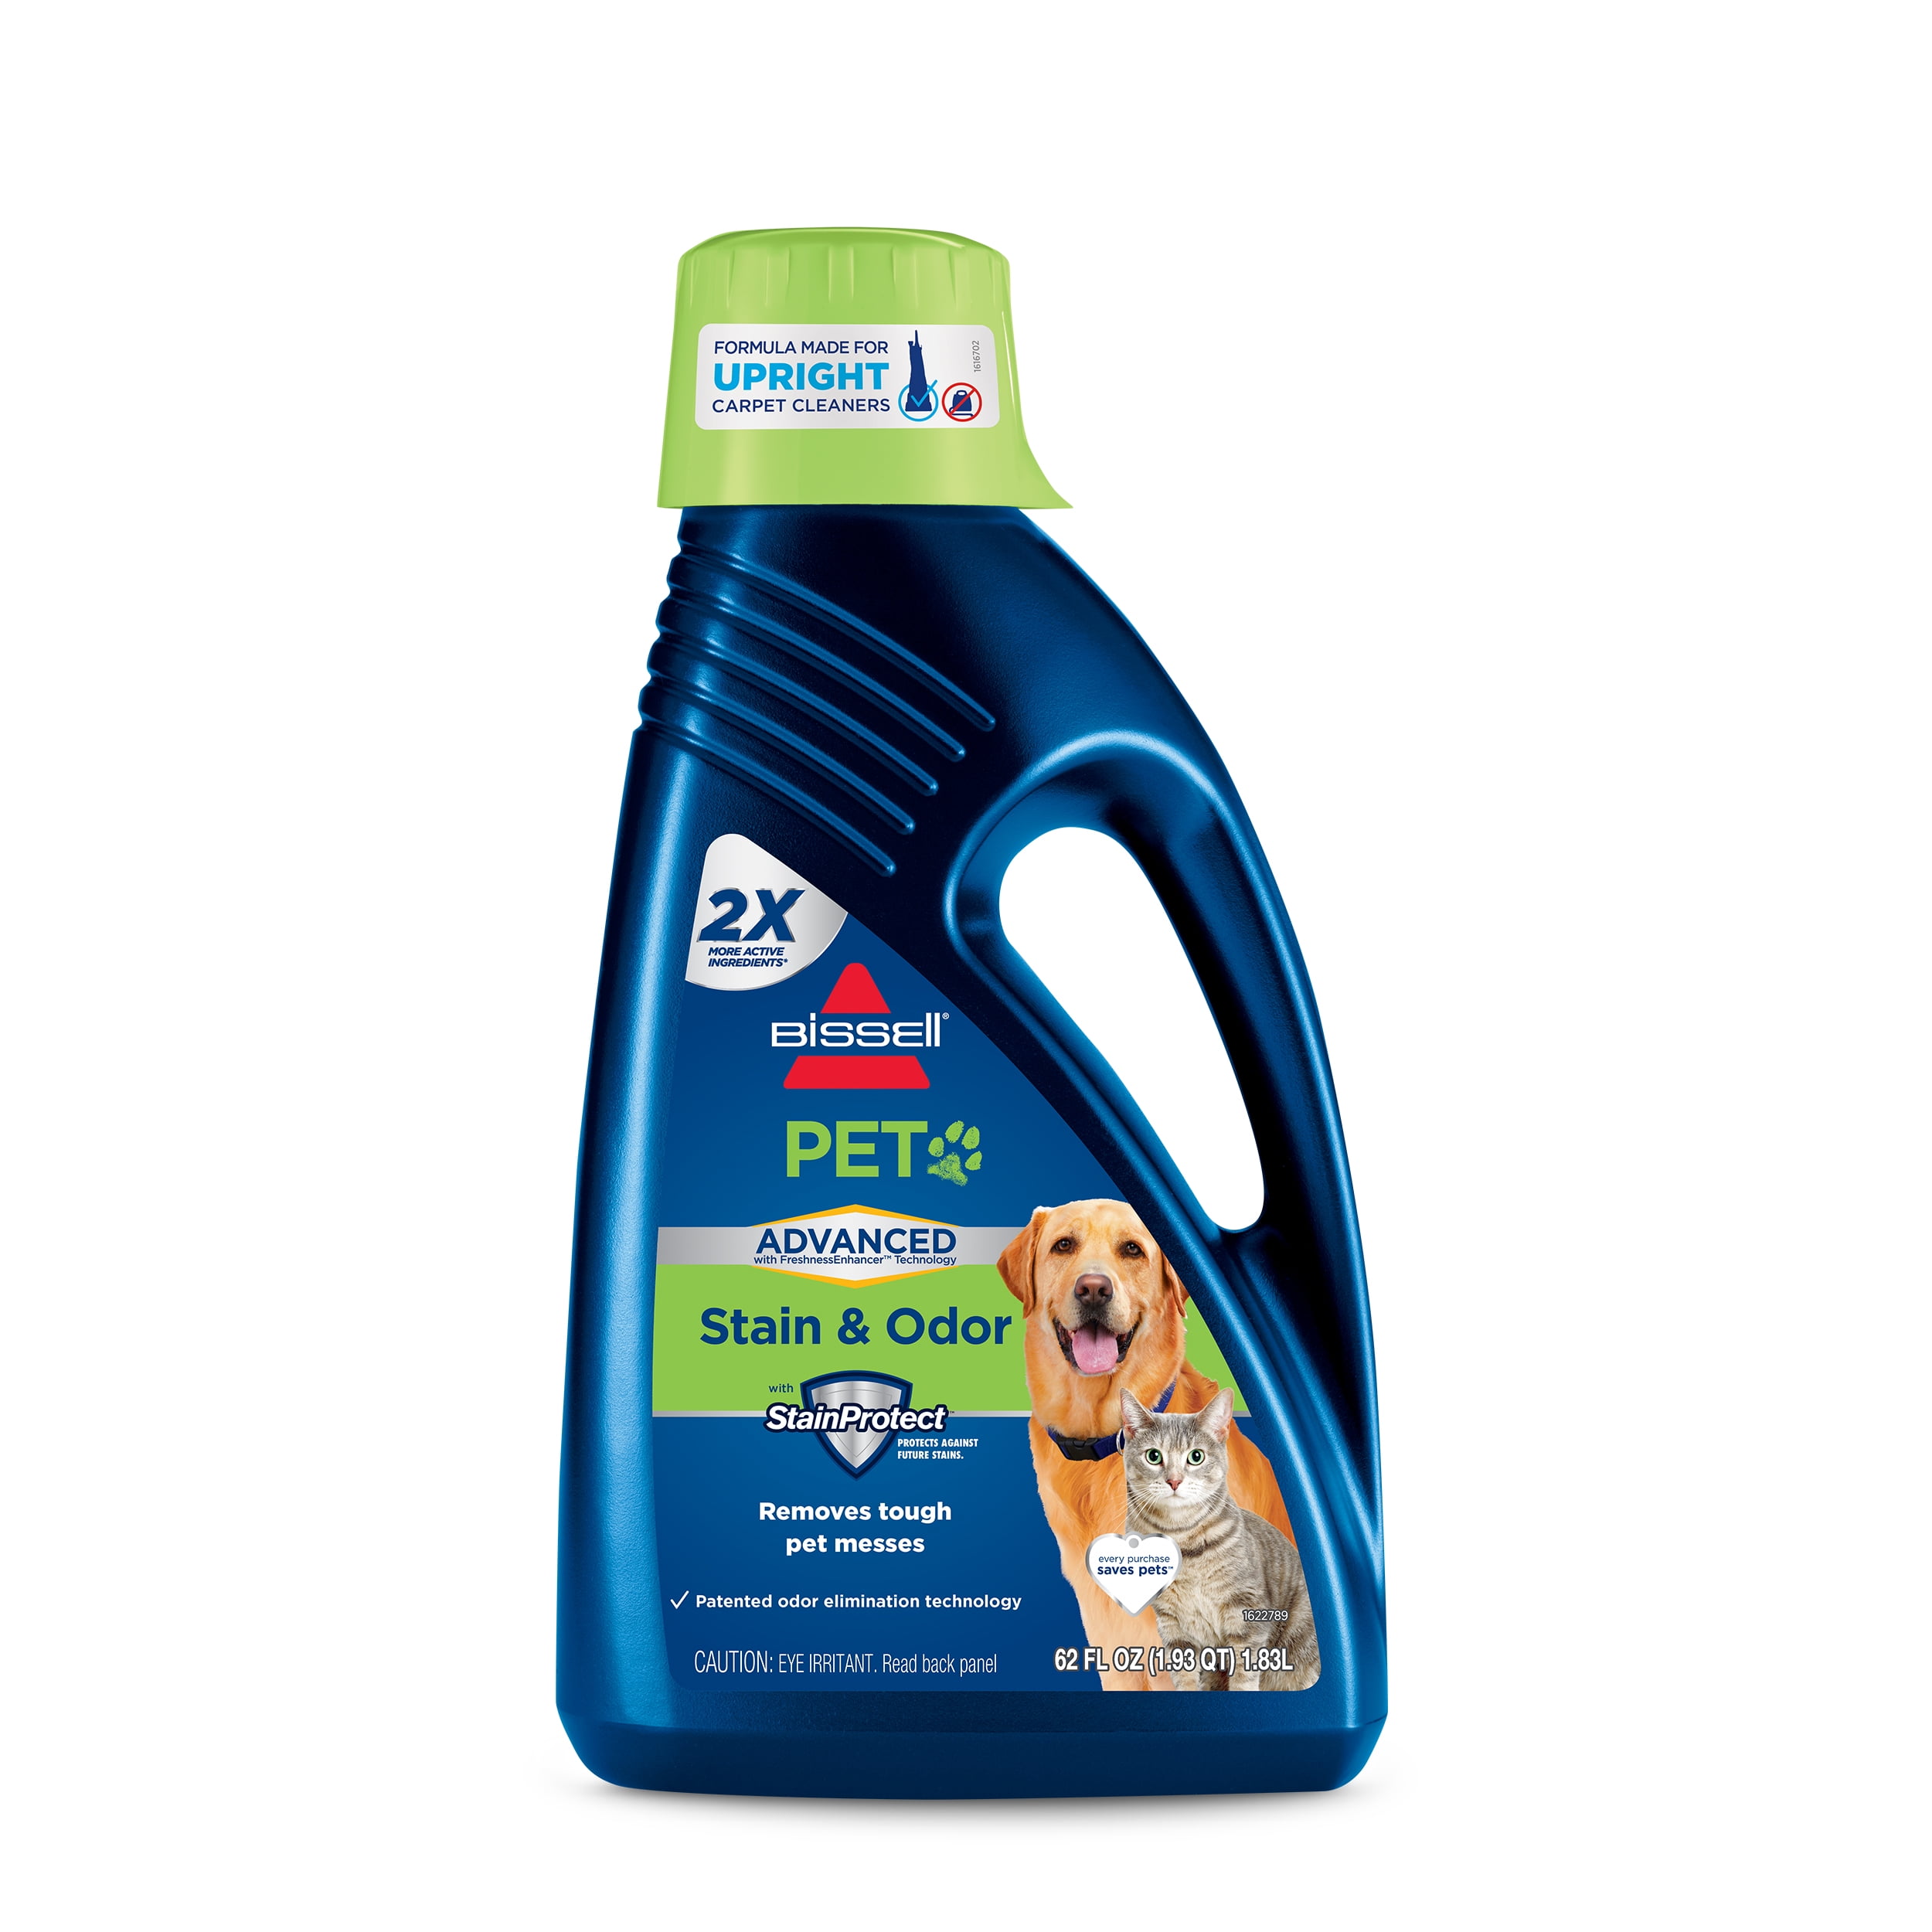 BISSELL Pet Stain Odor Remover, Unscented, 62 Fluid Ounce 88N2